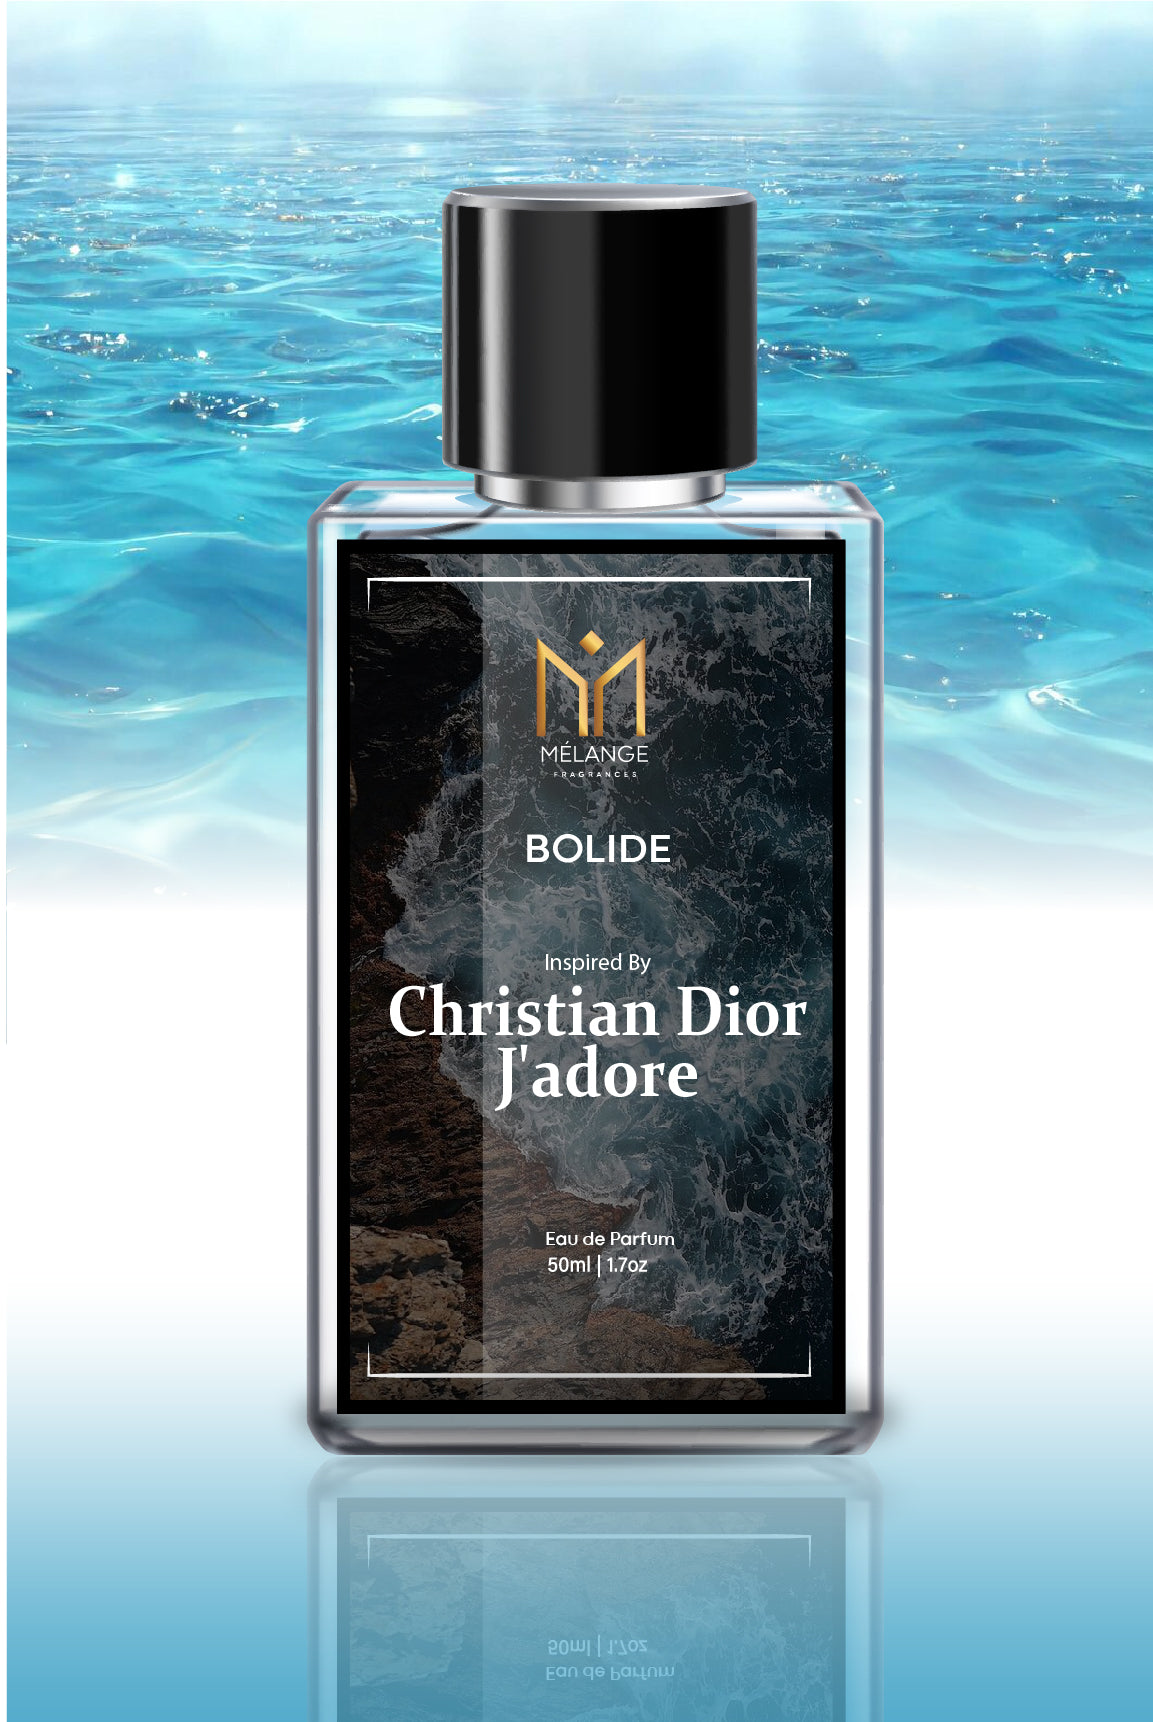 BOLIDE- Inspired by Christian Dior J'adore